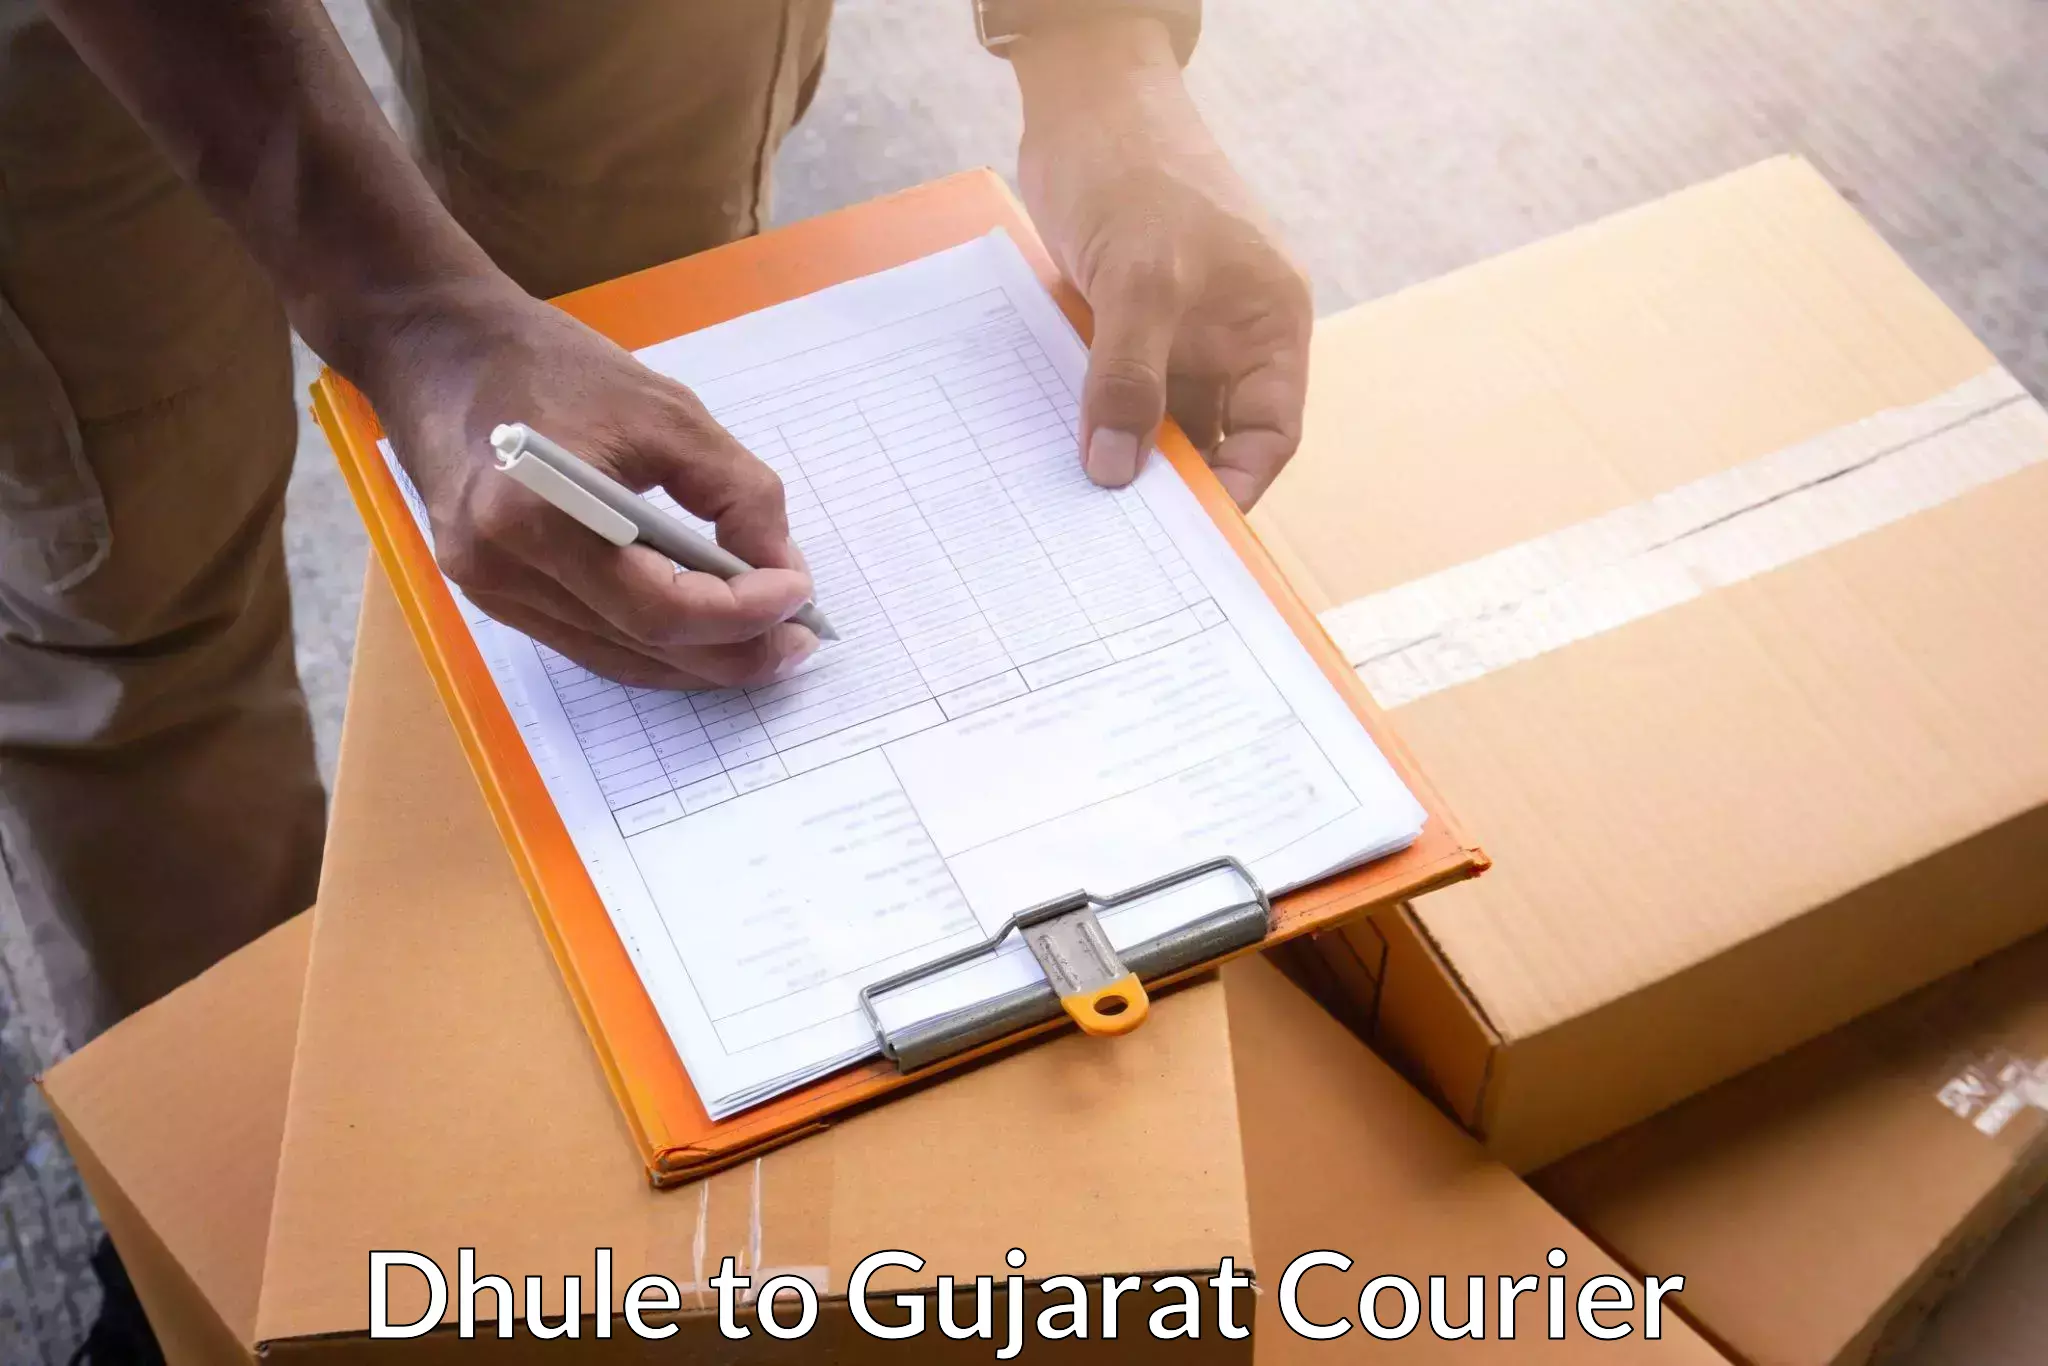 Package delivery network Dhule to Wankaner